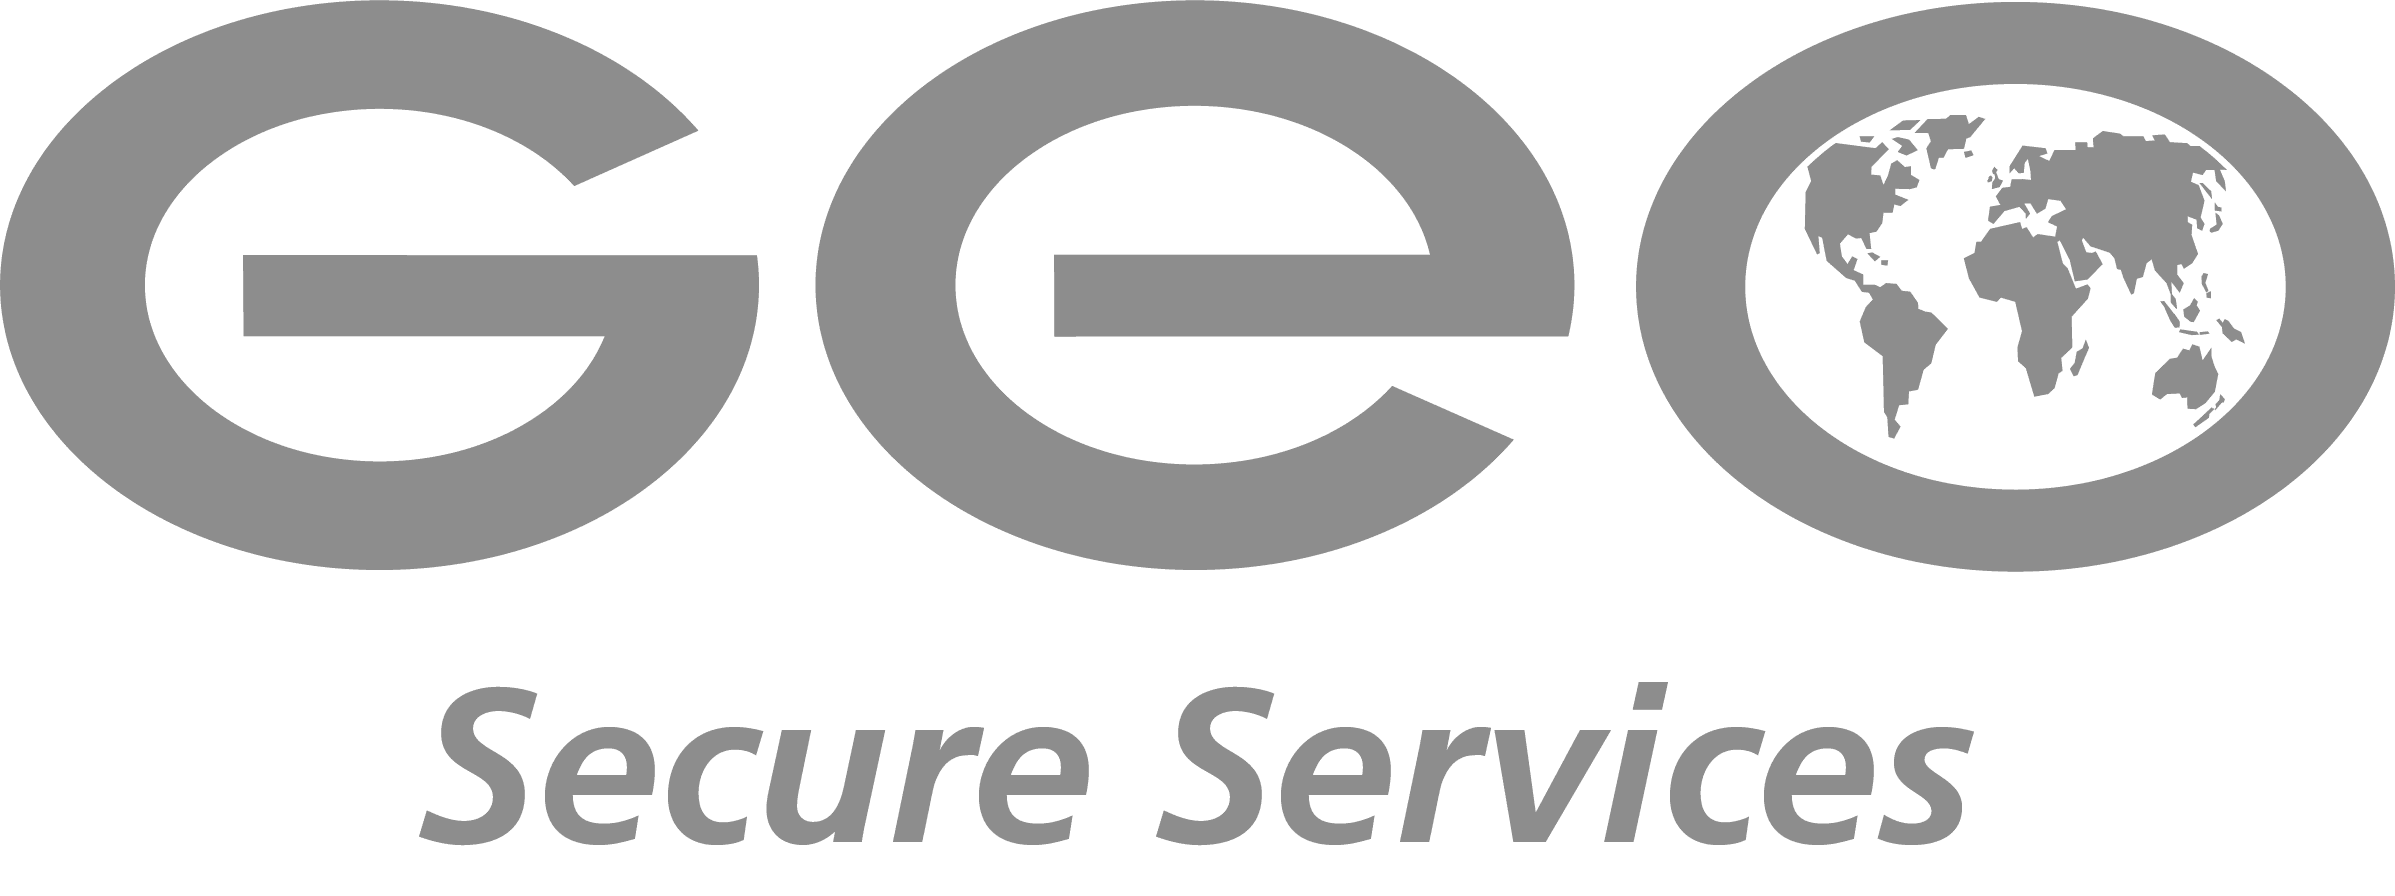 01-GEO-Secure-Services